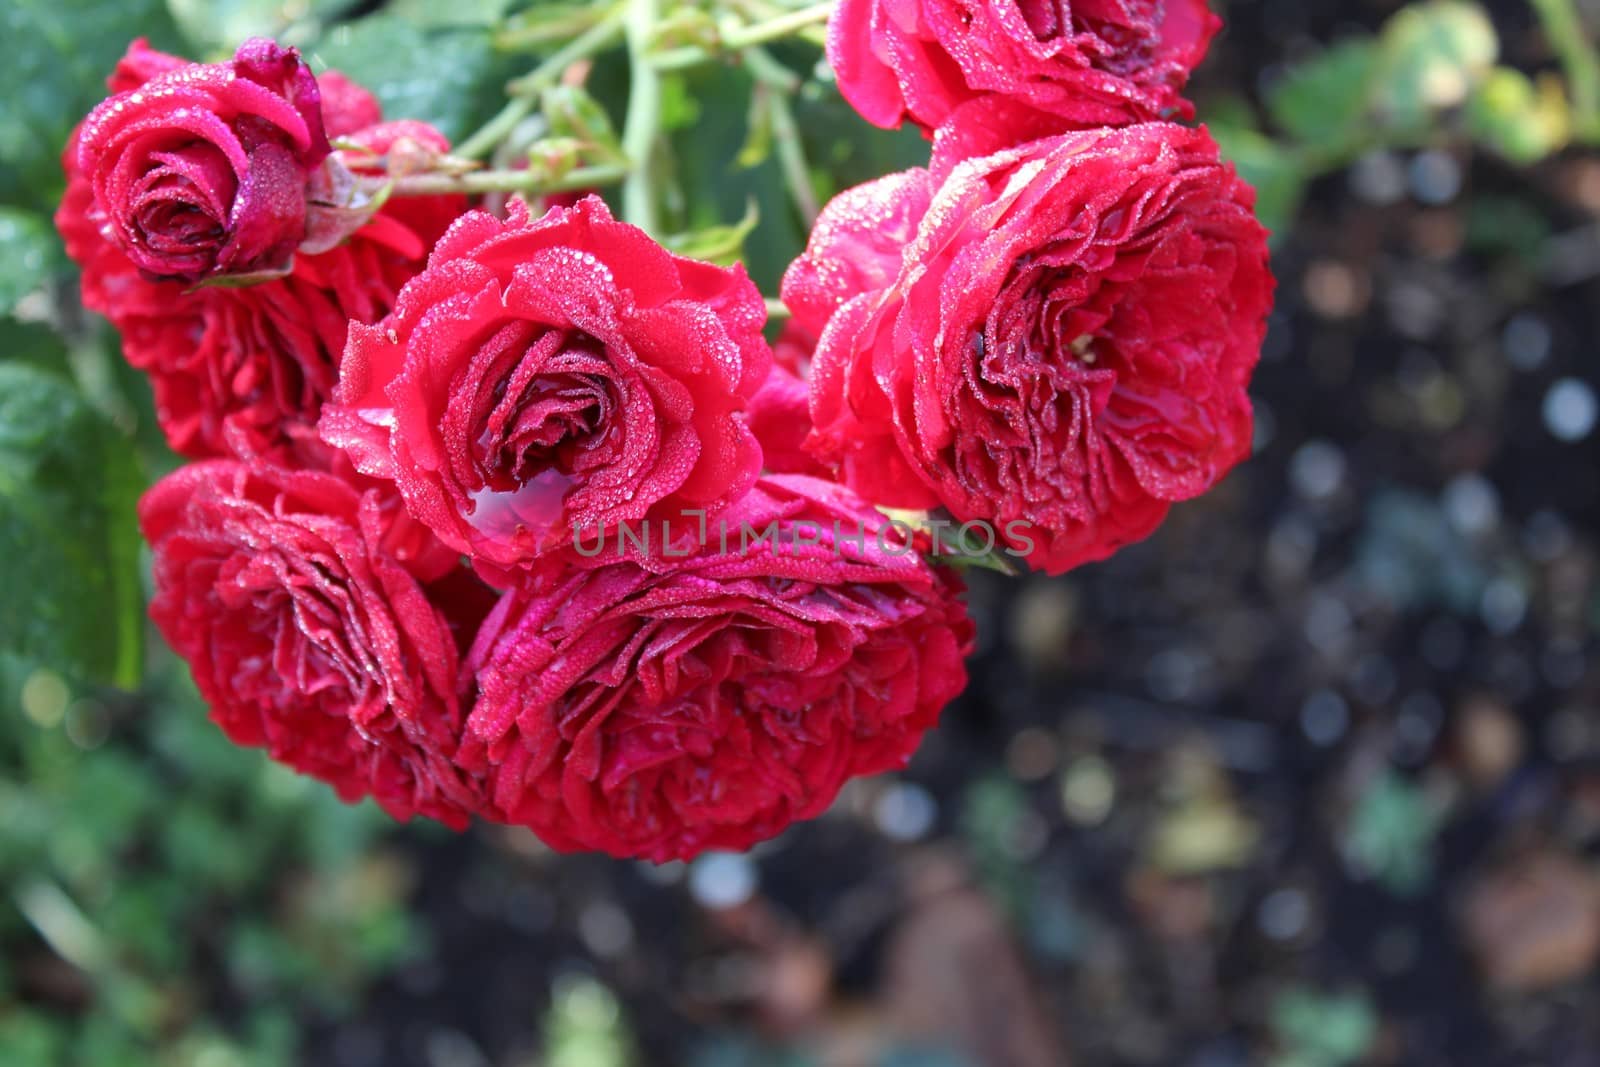 The picture shows red roses after the rain.